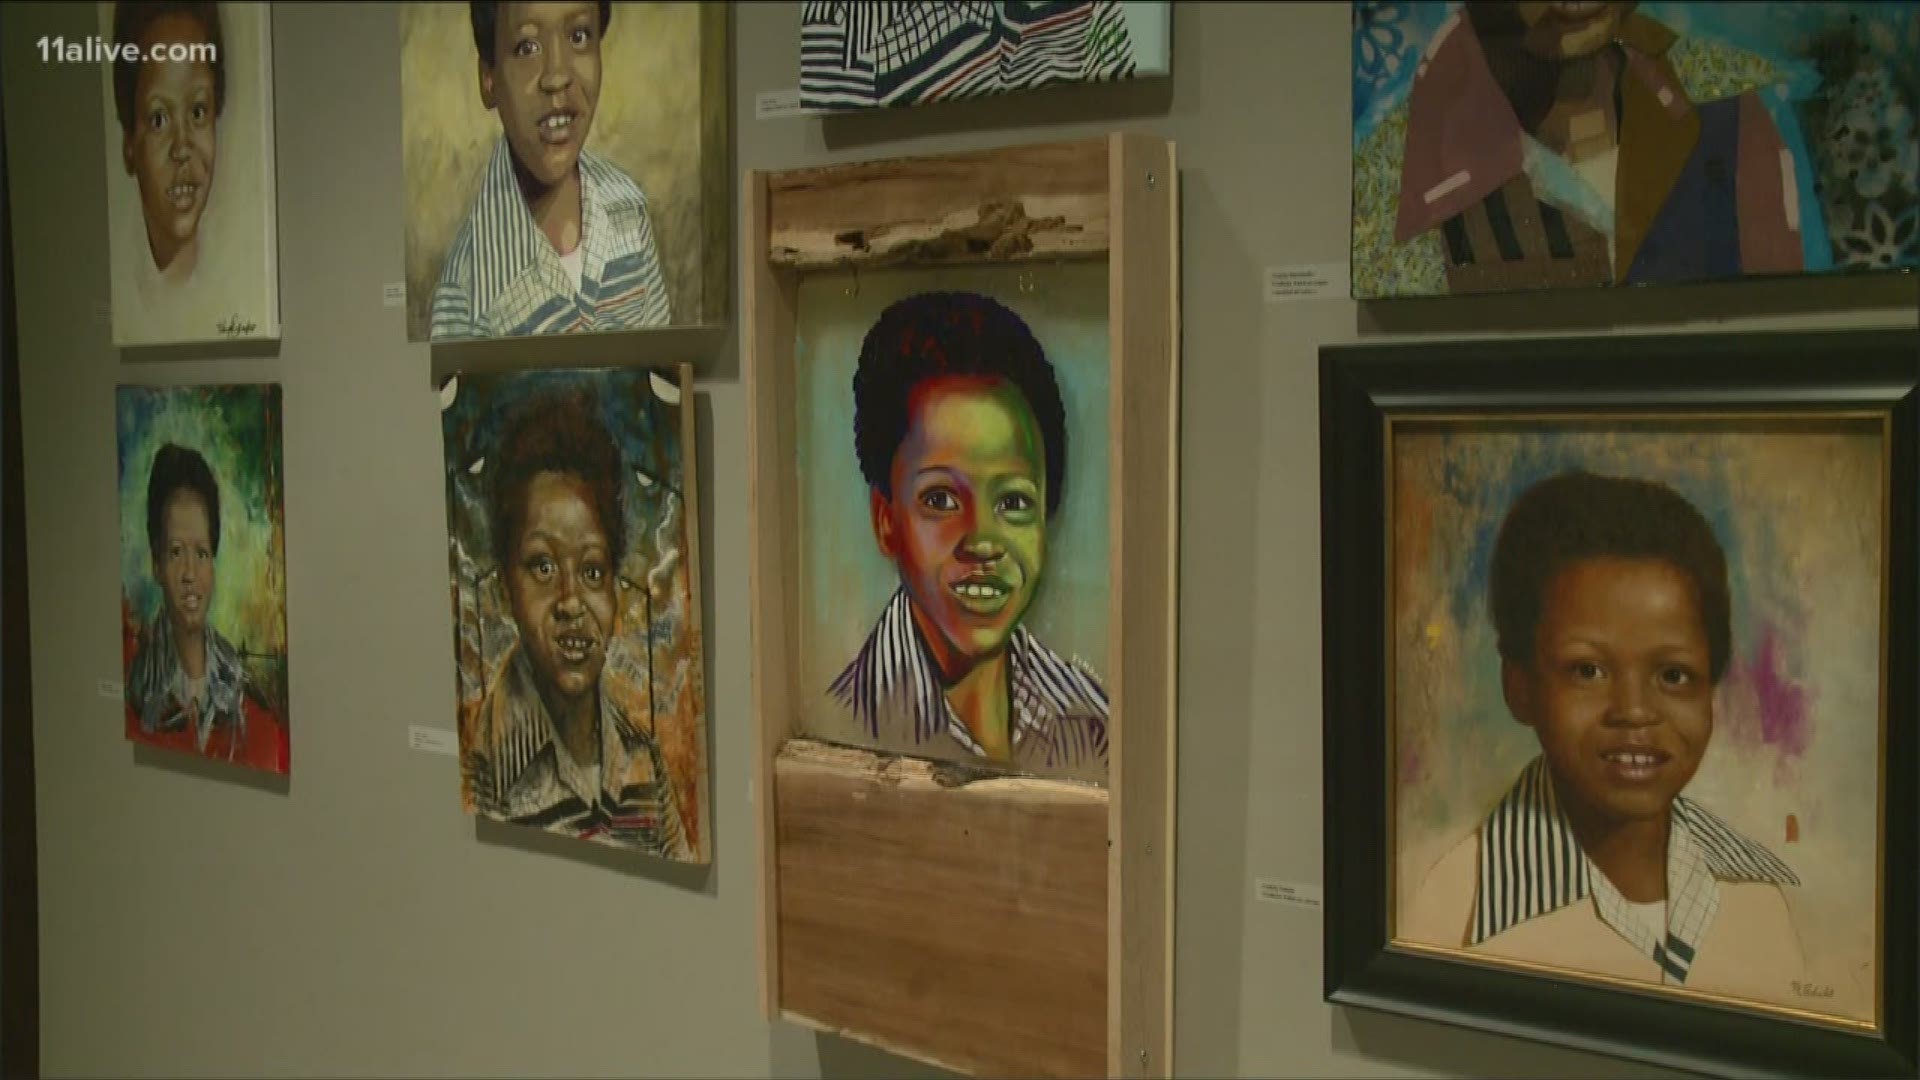 The project is one of two tributes the city is planning for victims of the Atlanta Child Murders.